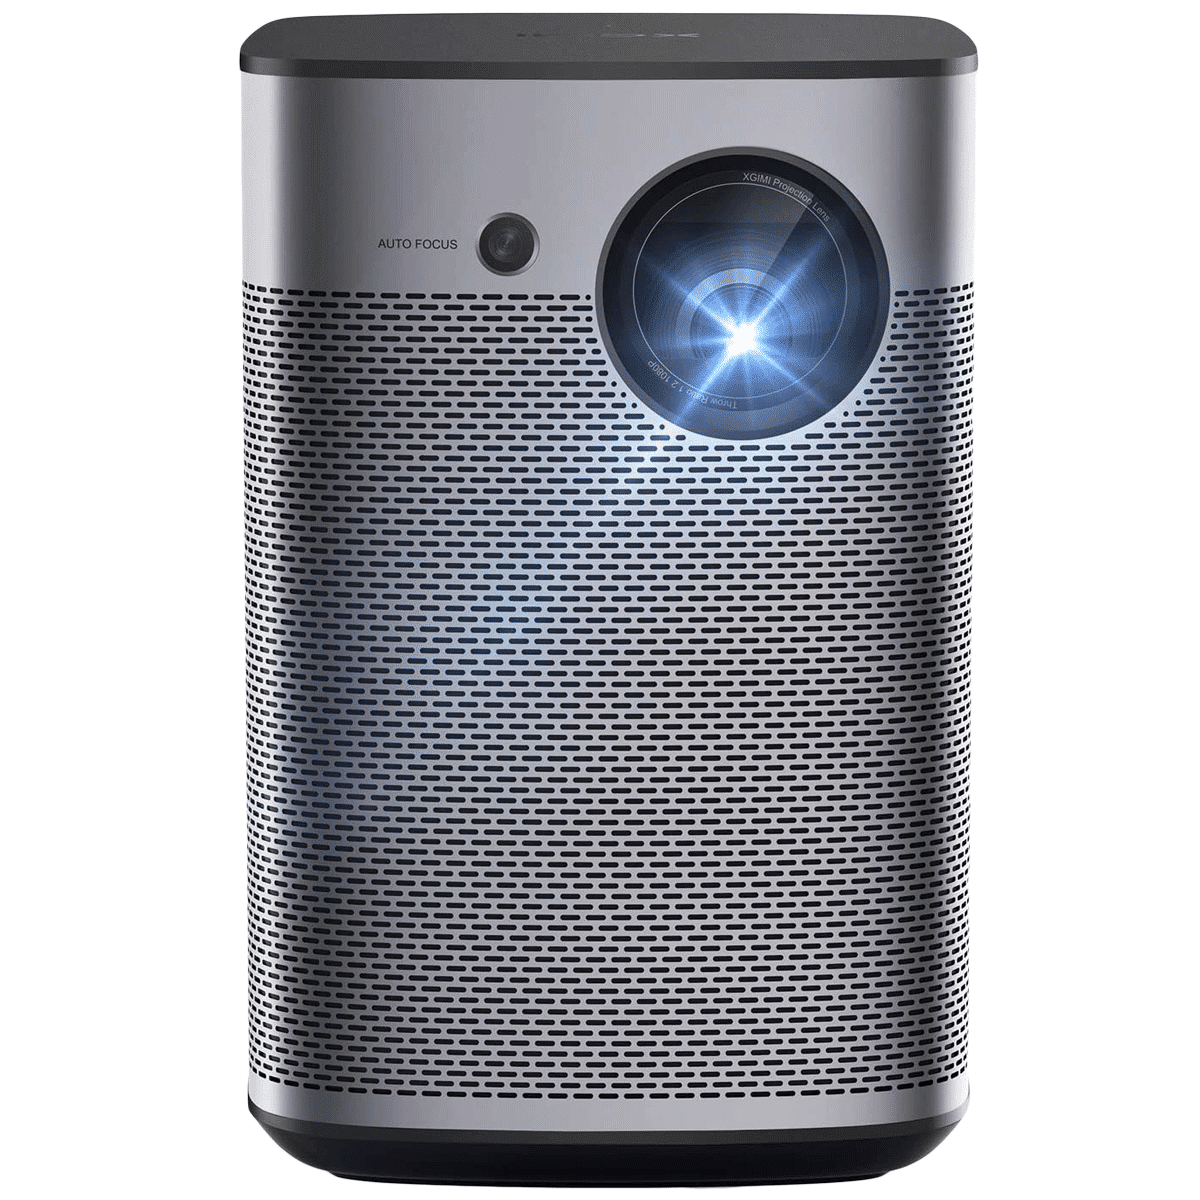 XGIMI Play X Home Projector Price - XGIMI Projectors